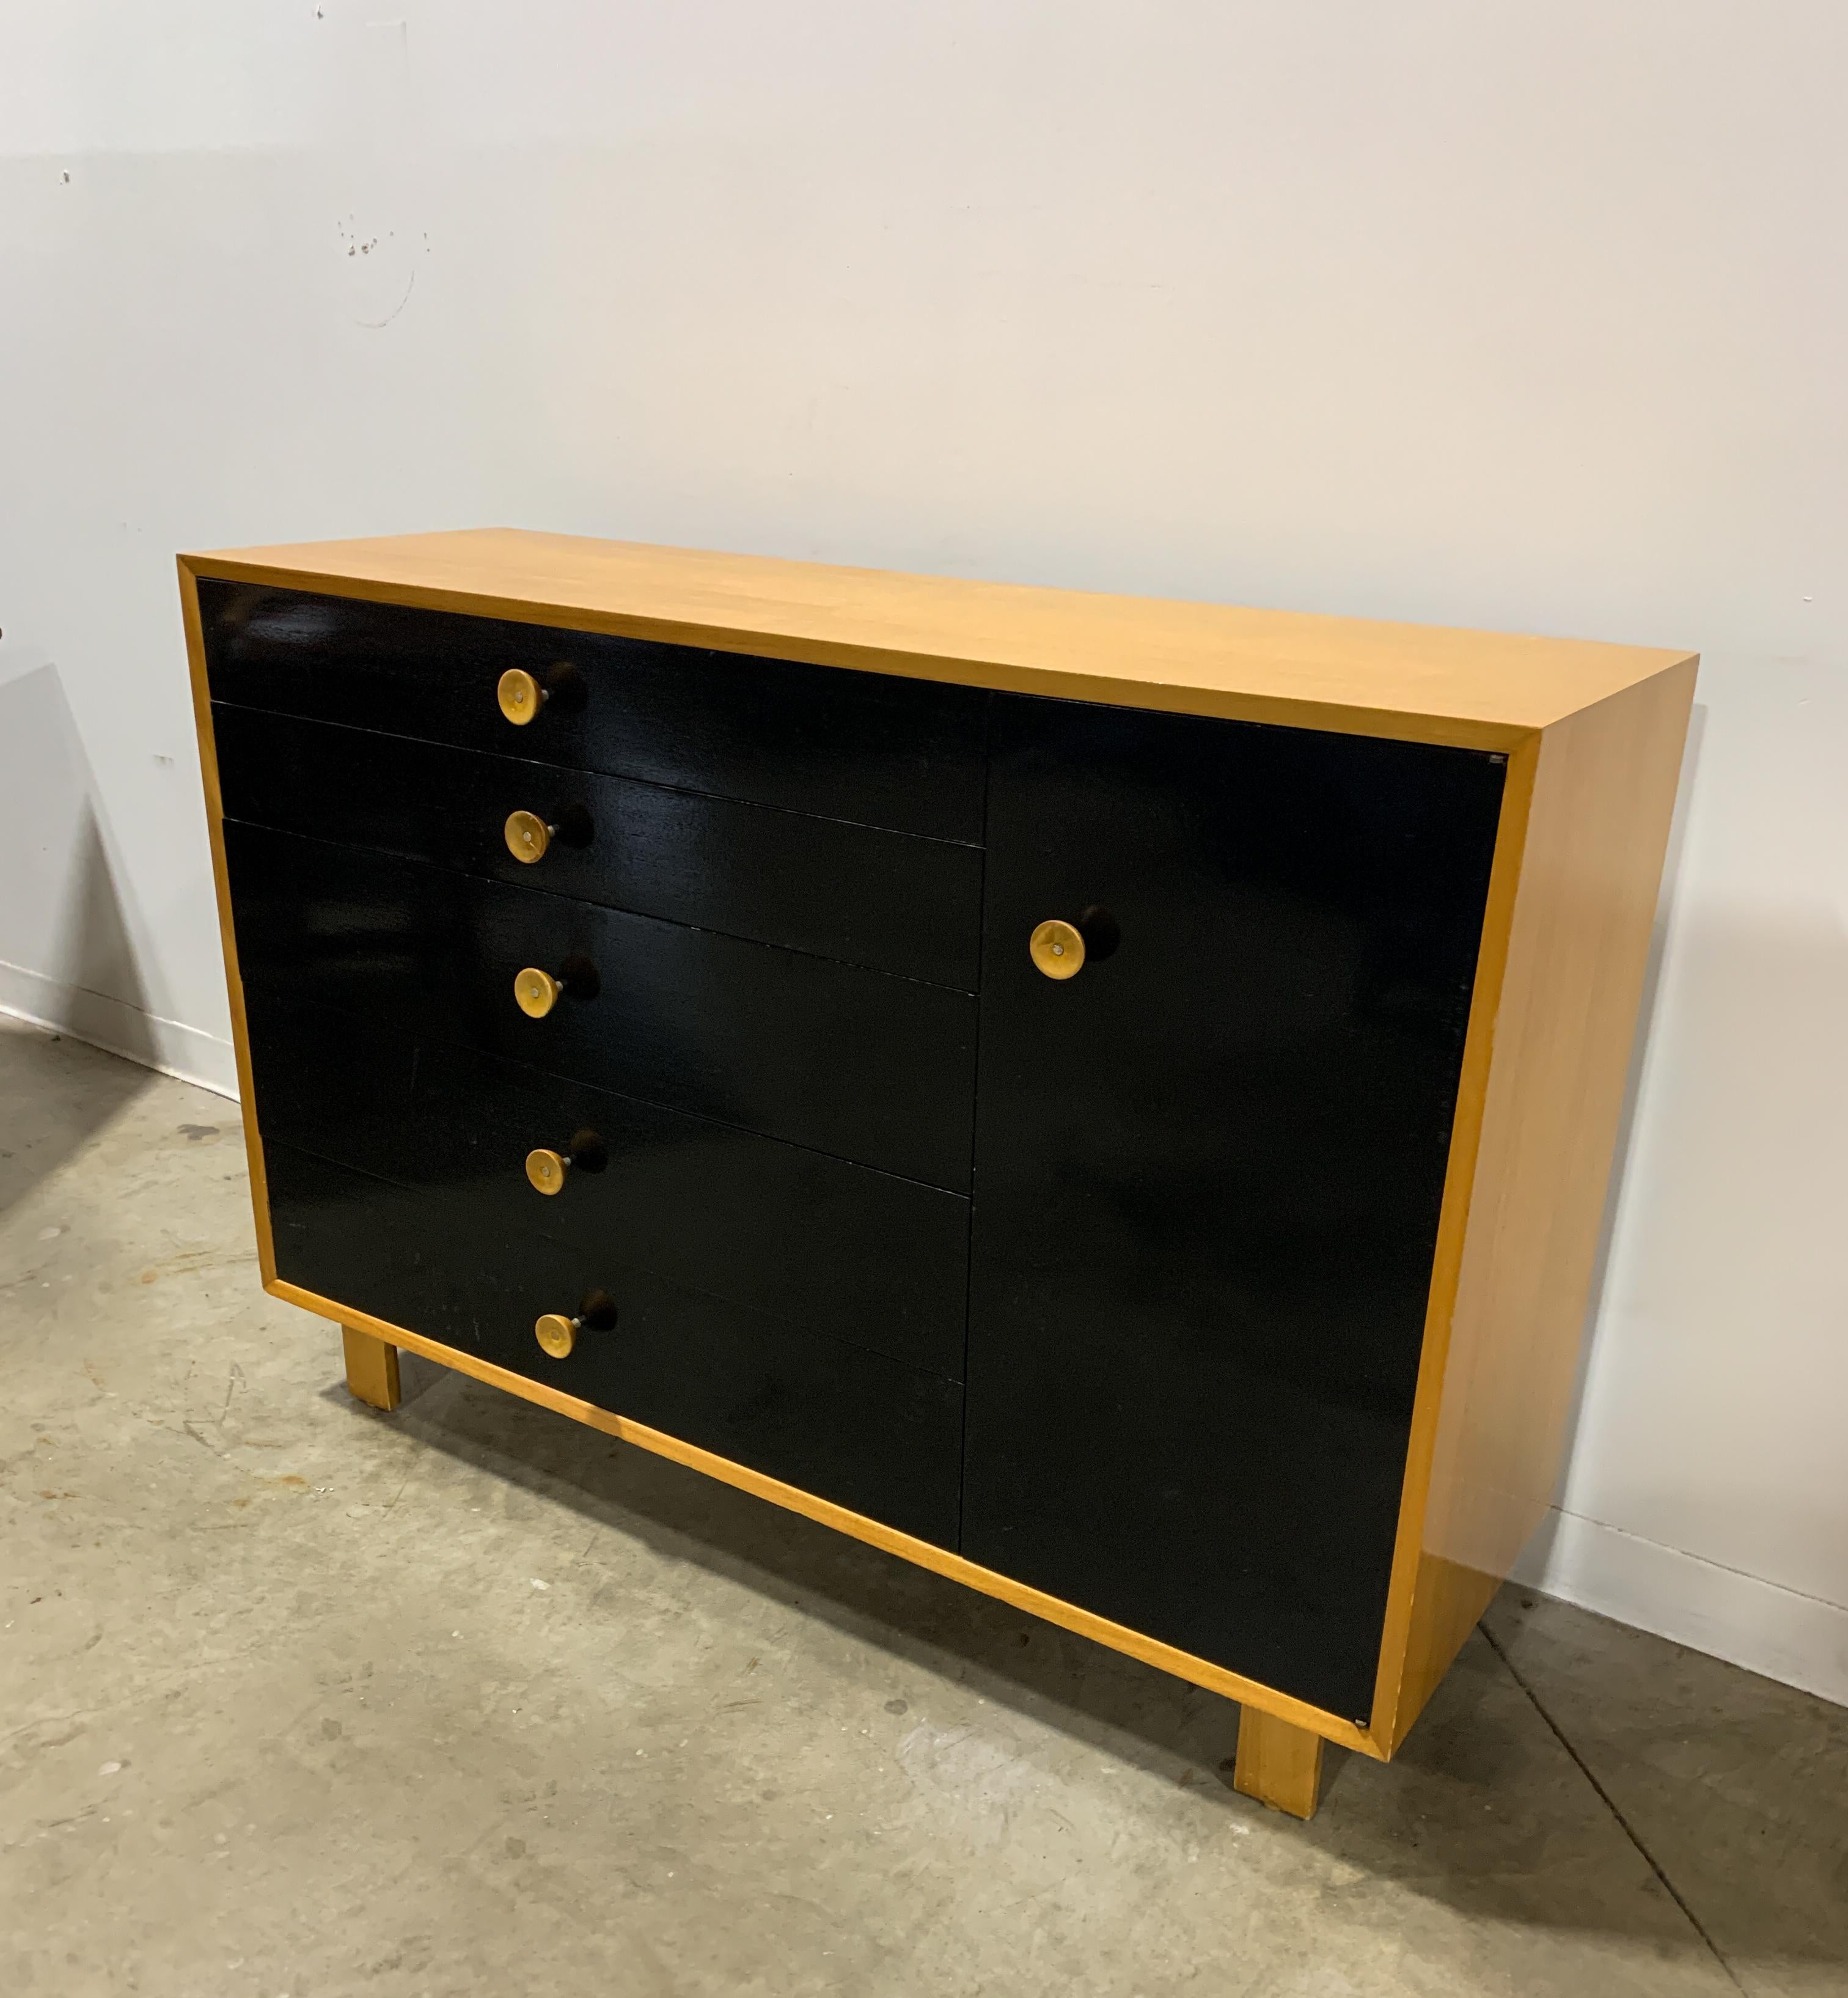 Rare George Nelson designed black front dresser in primavera case from Herman Millers early modern BCS (Basic Cabinet Series) line. Beautiful primavera grain shimmers and the Classic cupcake pulls add further character to the piece. Ample storage